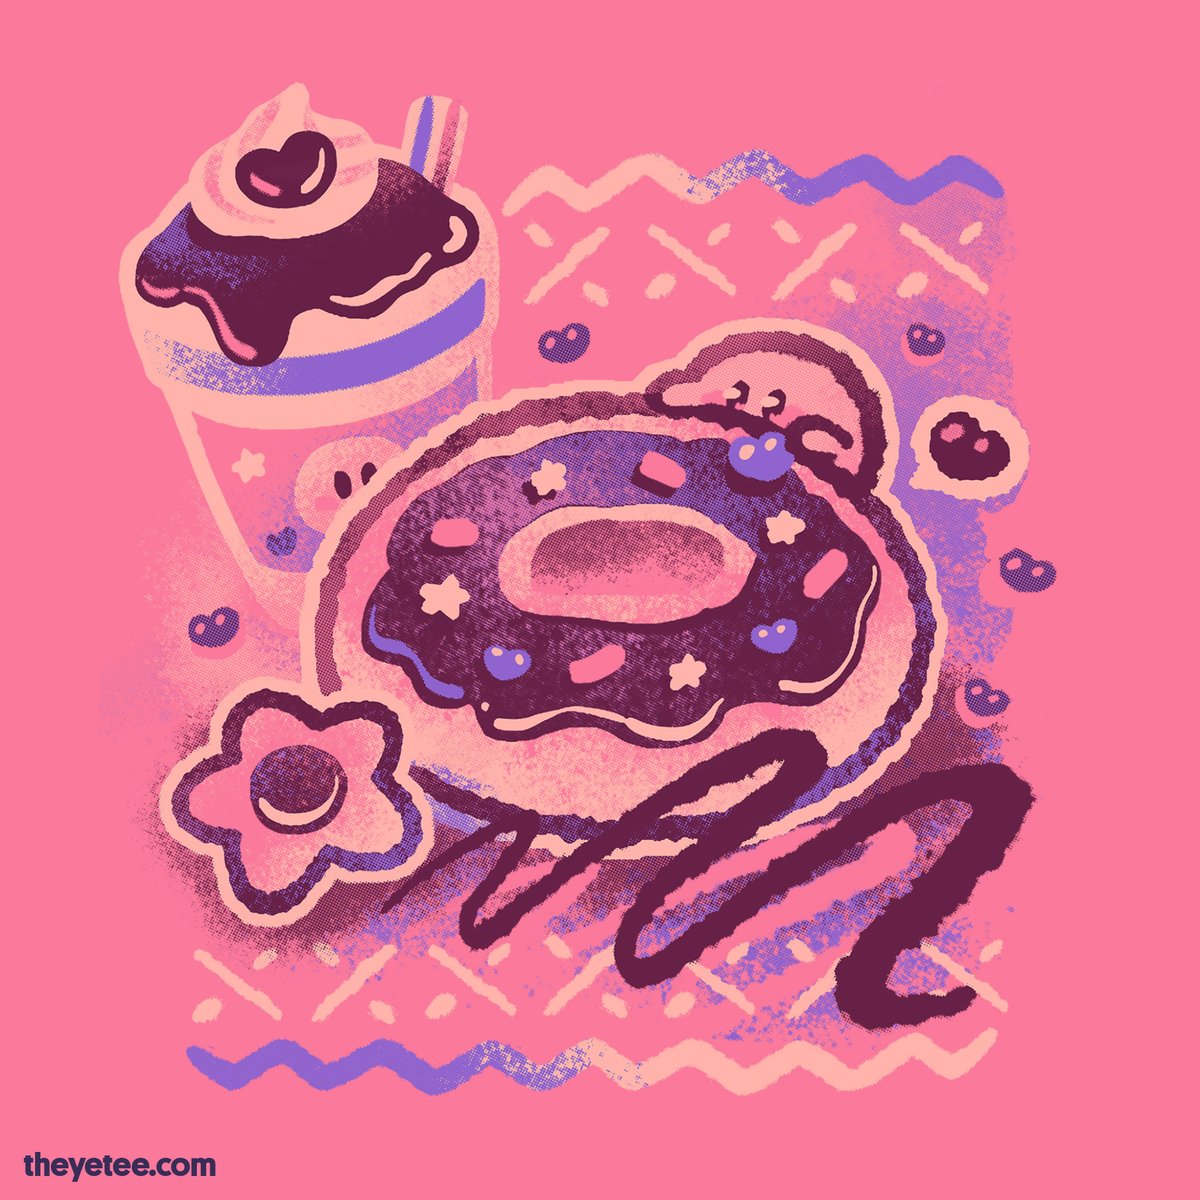 「A treat this big deserves to be shared! 」|The Yetee 🌈のイラスト